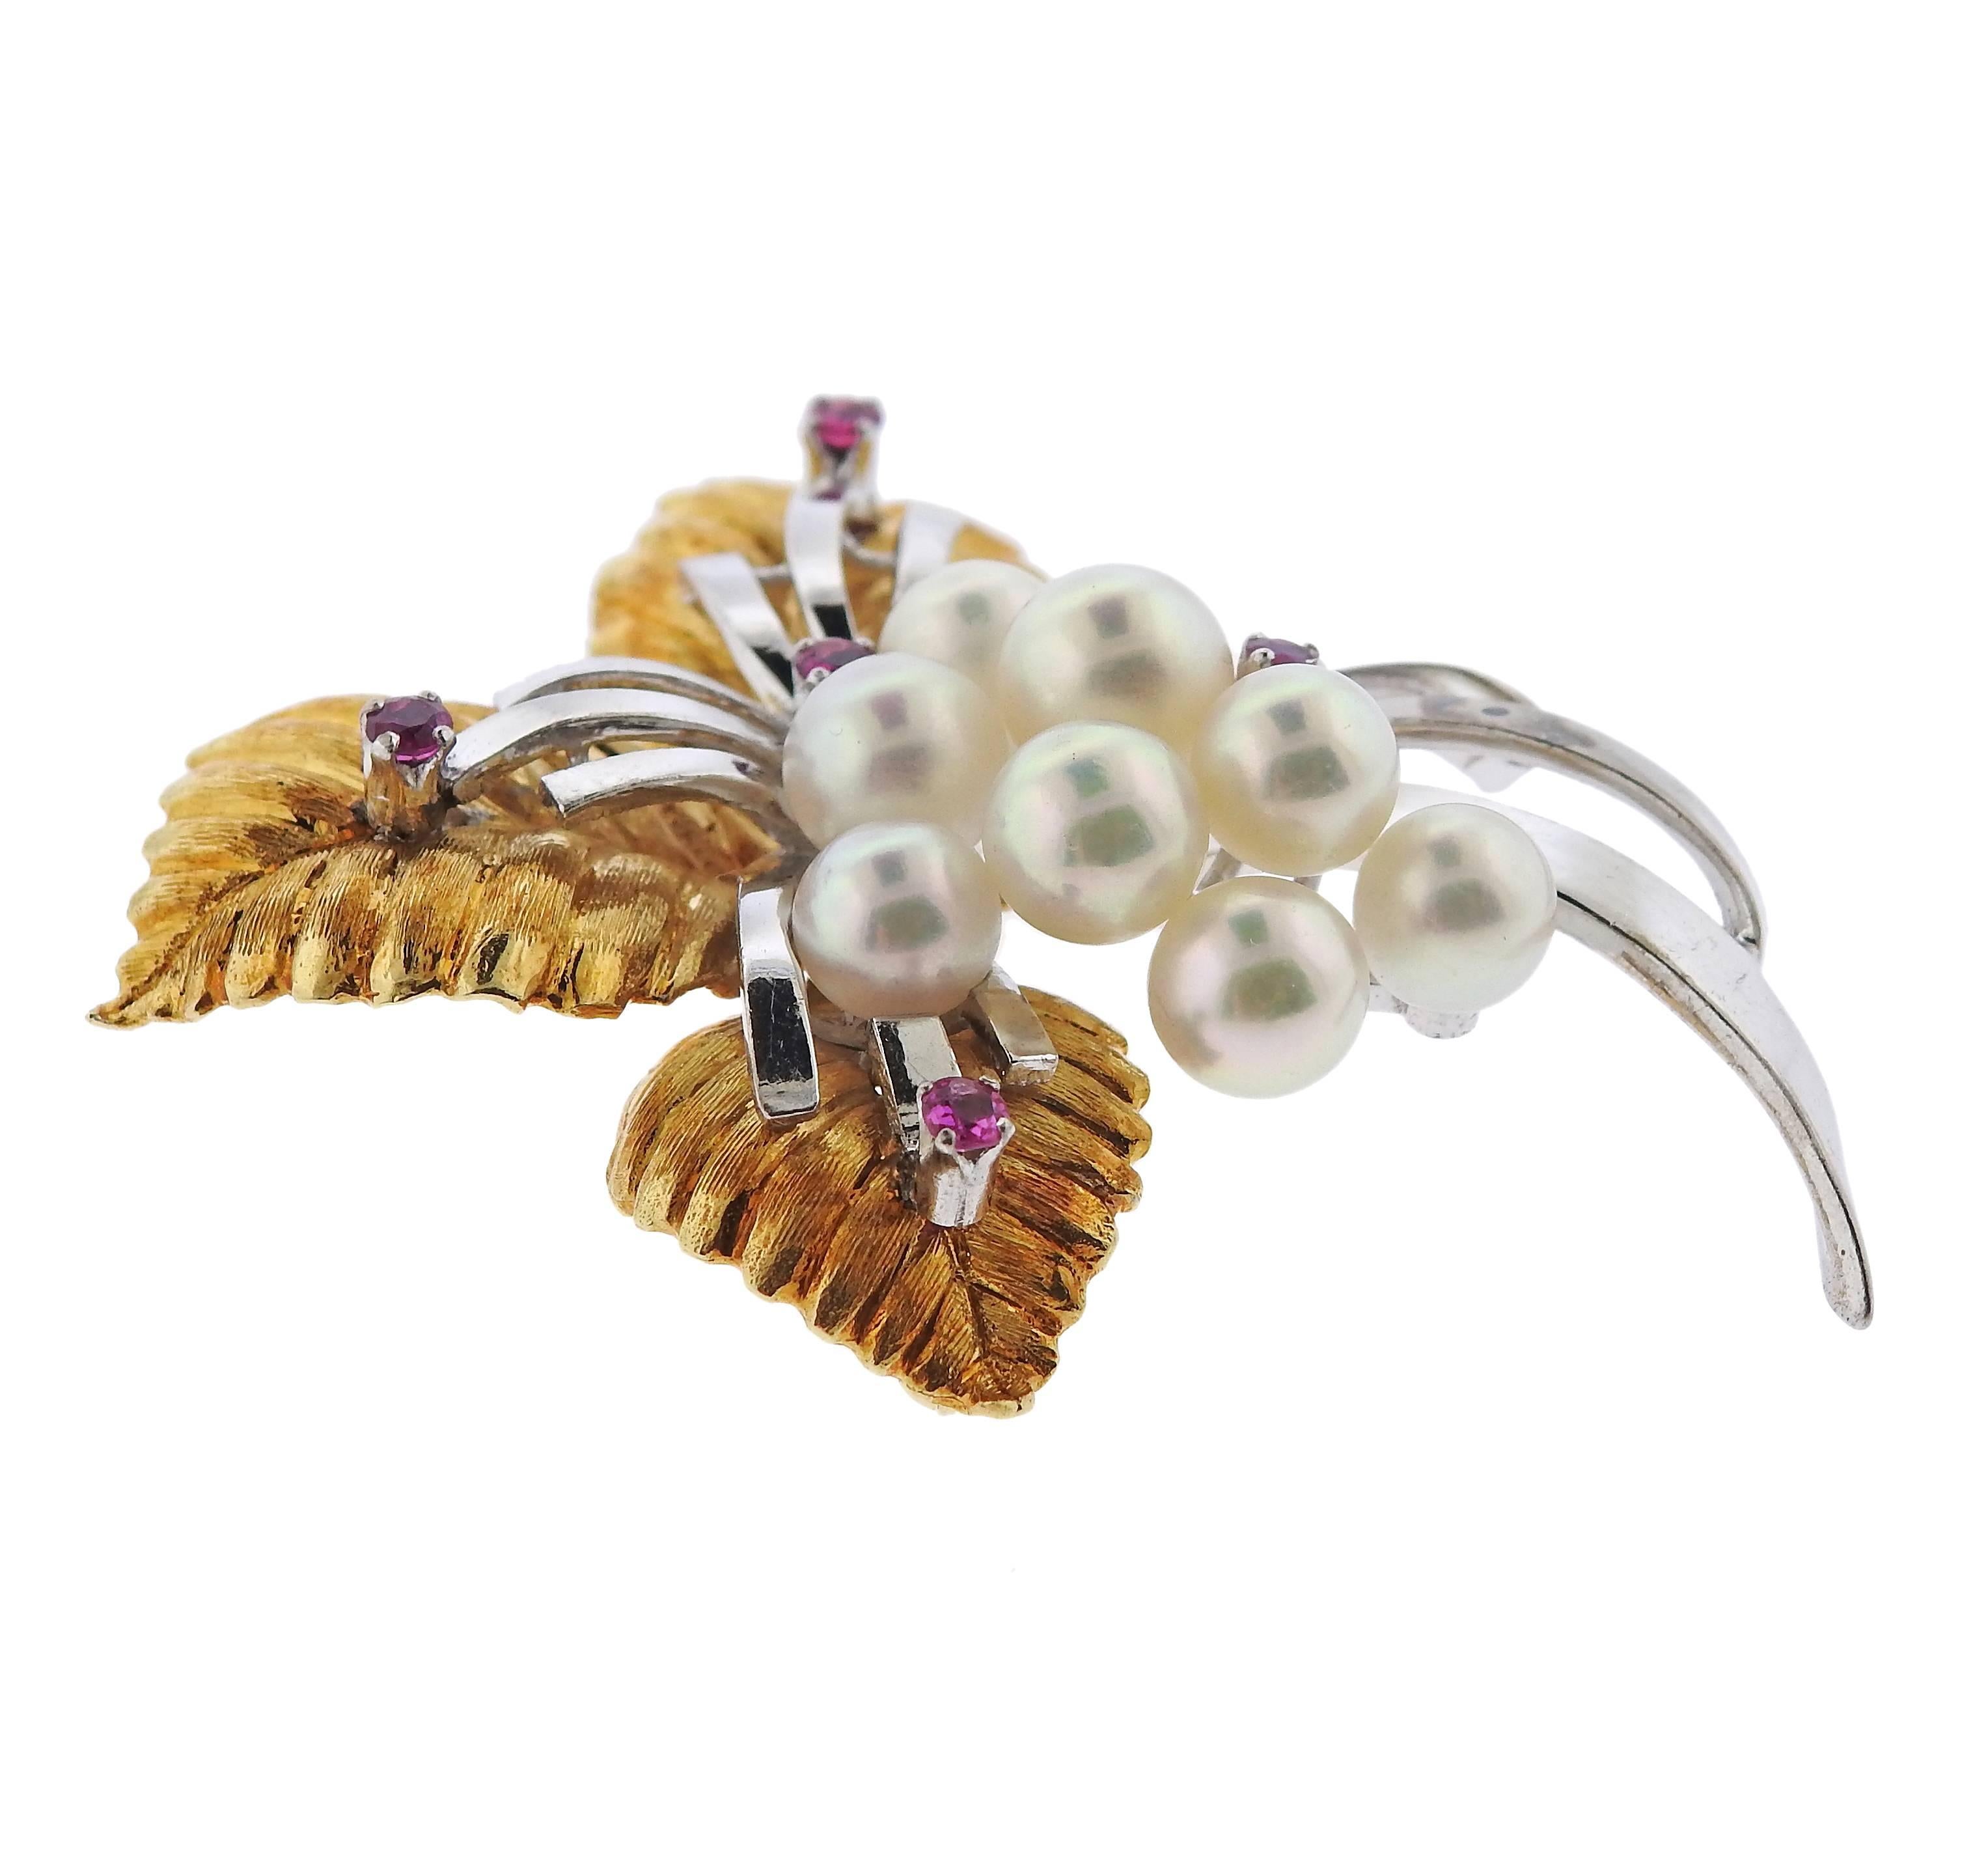 Vintage 18k and 14k gold brooch, designed by Mikimoto, decorated with rubies and 6.5mm to 7.5mm pearls. Brooch is 54mm x 50mm, weight - 25.3 grams. Marked: k18 k14, WG, Mikimoto M hallmark.